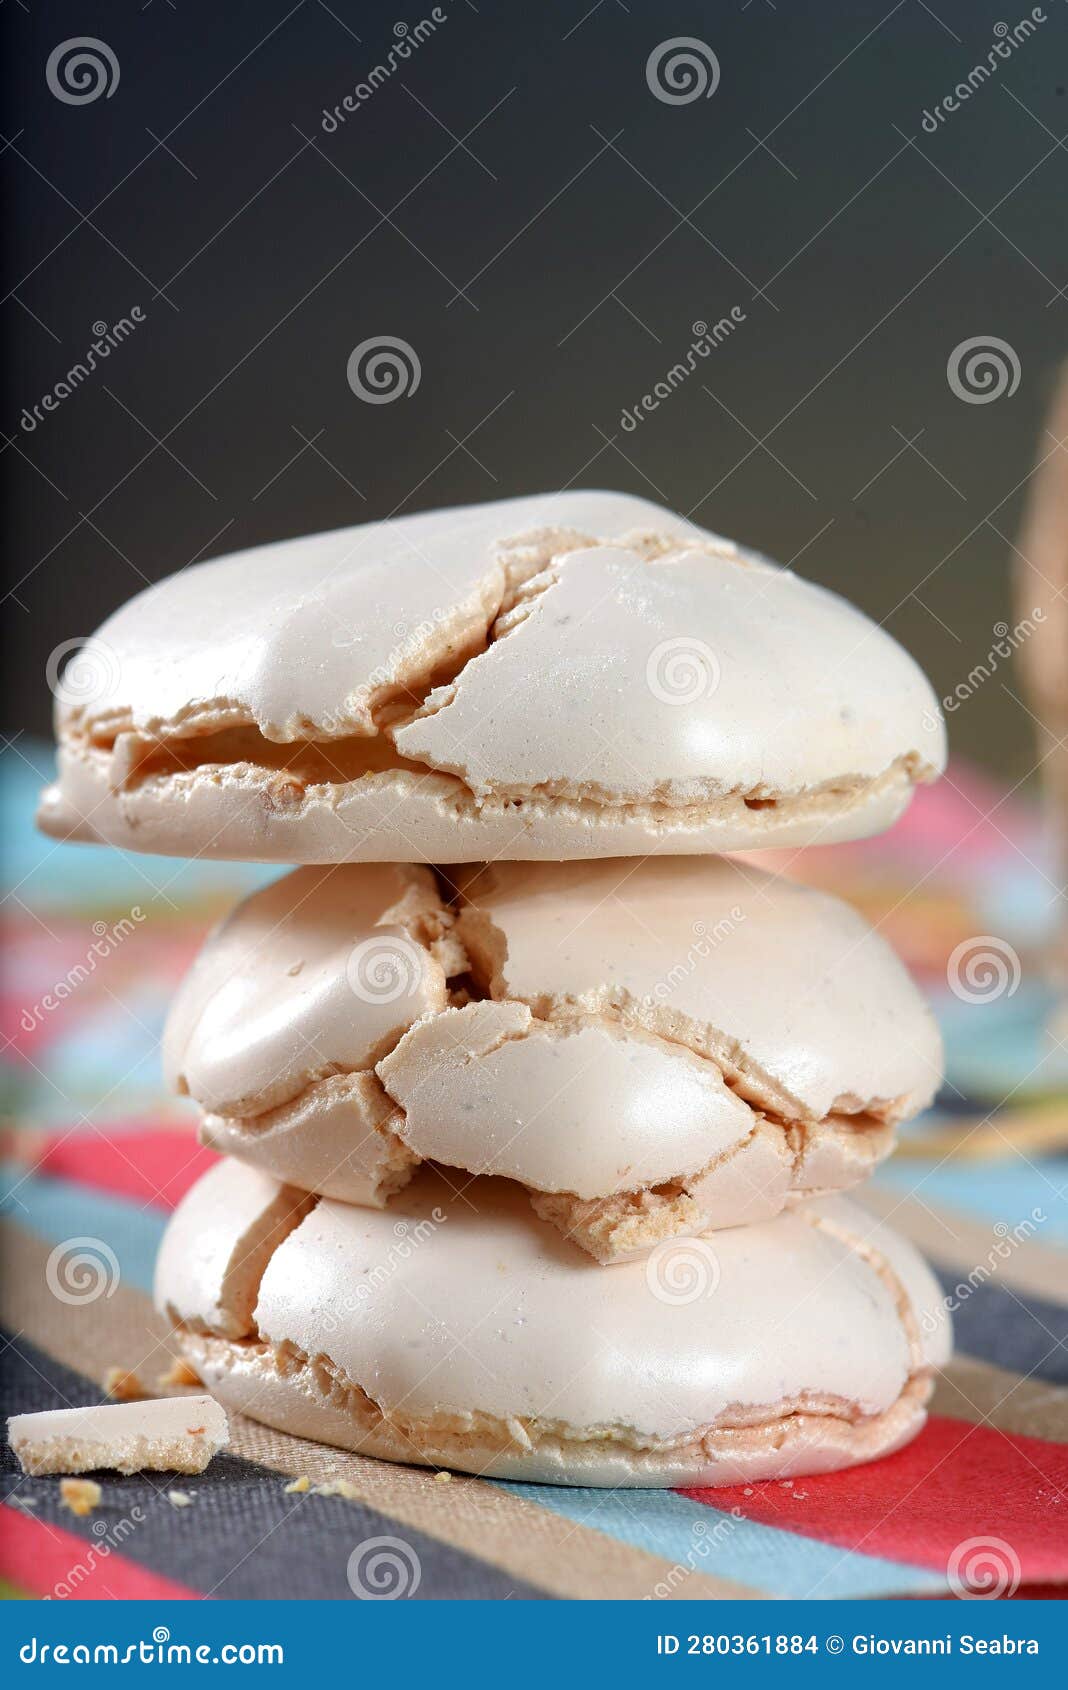 homemade cookies, sighs, also called merengue, brazilian and french cuisine, sigh candy